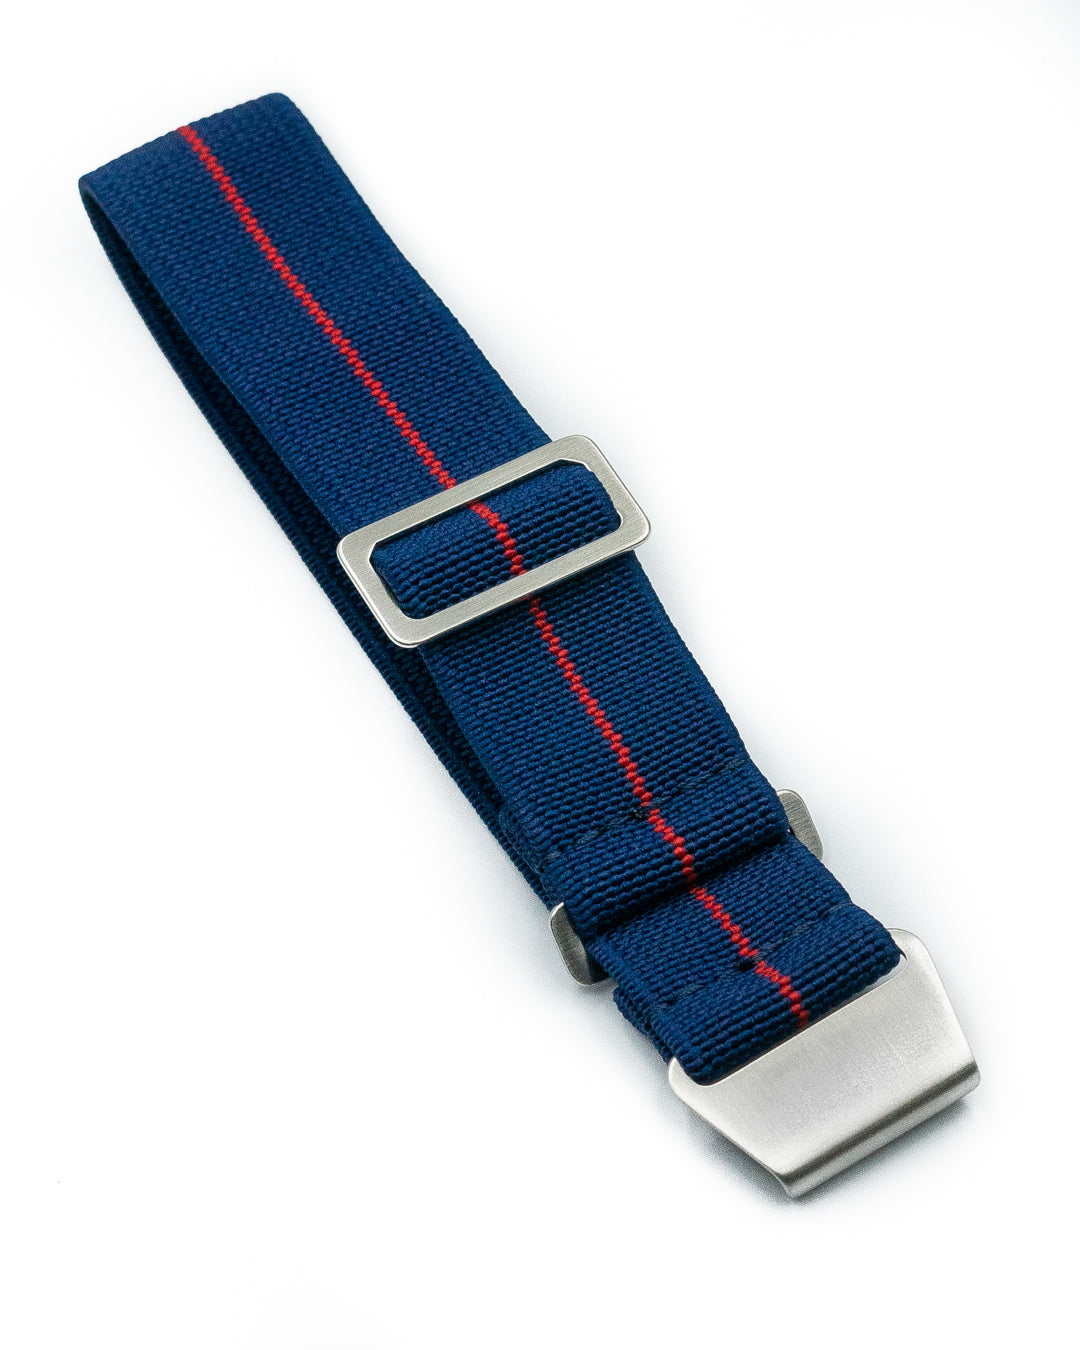 PARA Elastic - Navy Blue with Red Centerline